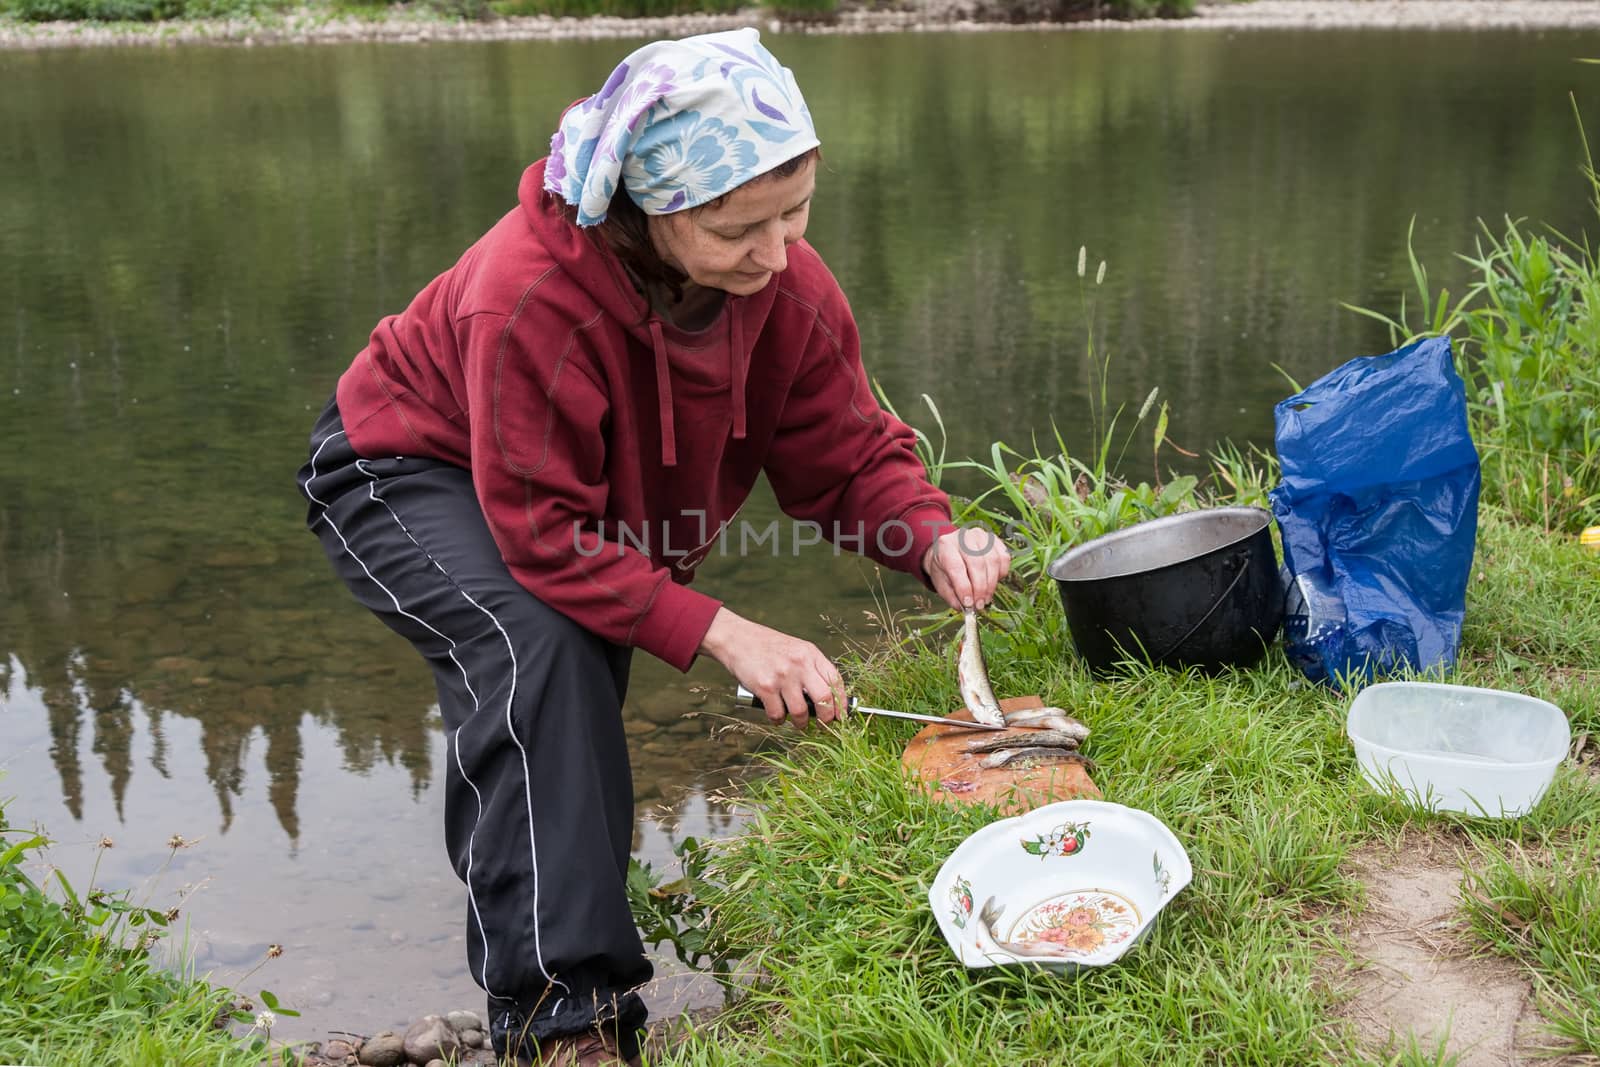 A woman cleans a fish on the river bank